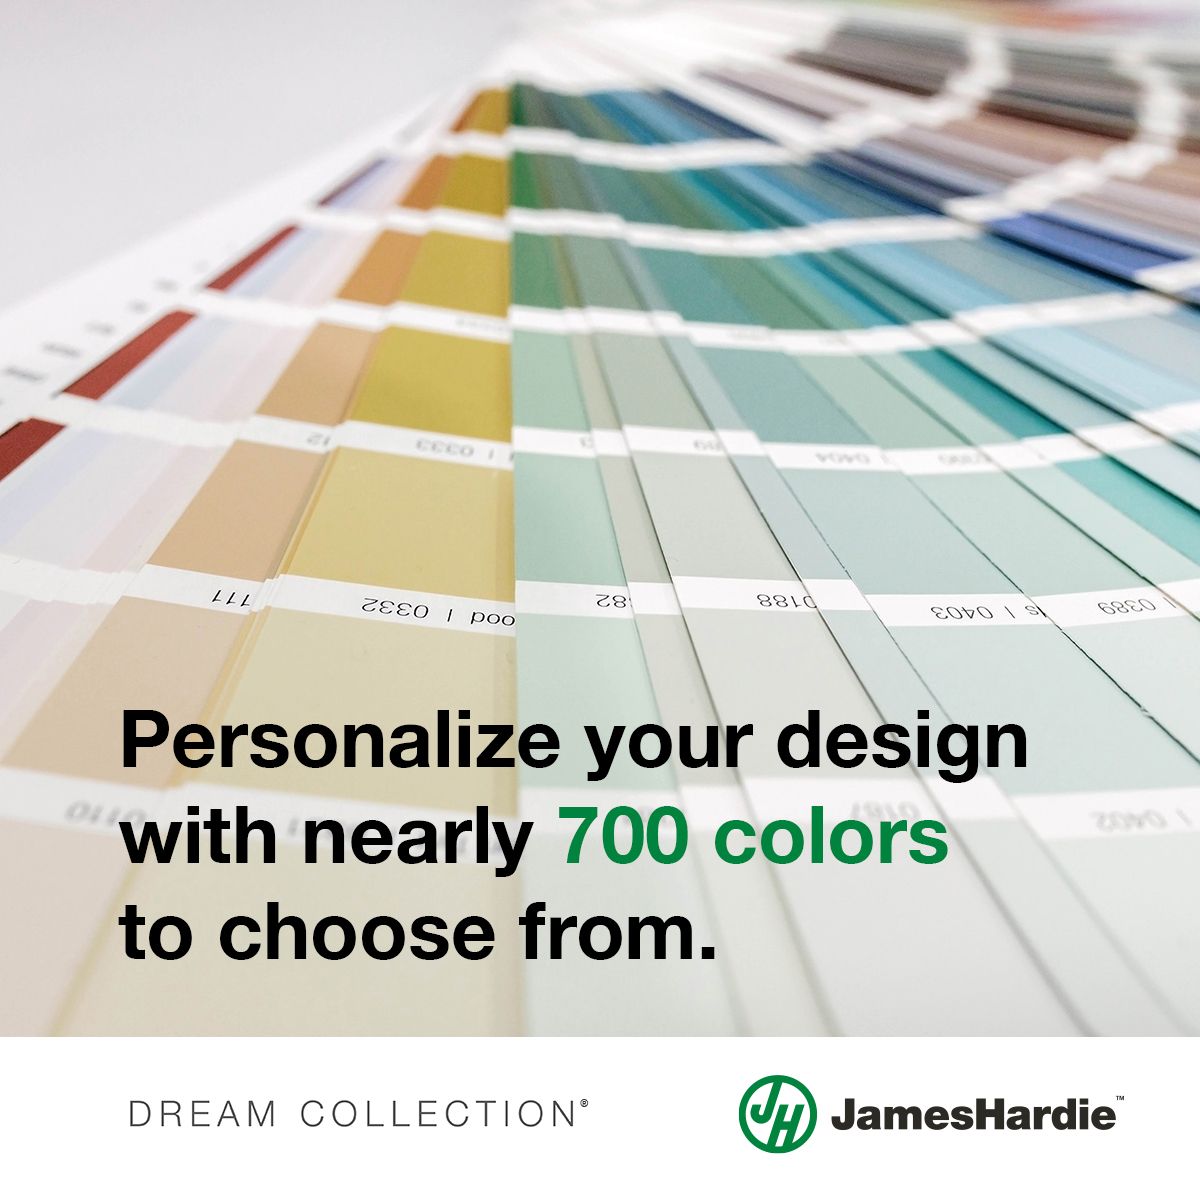 A poster that says personalize your design with nearly 700 colors to choose from